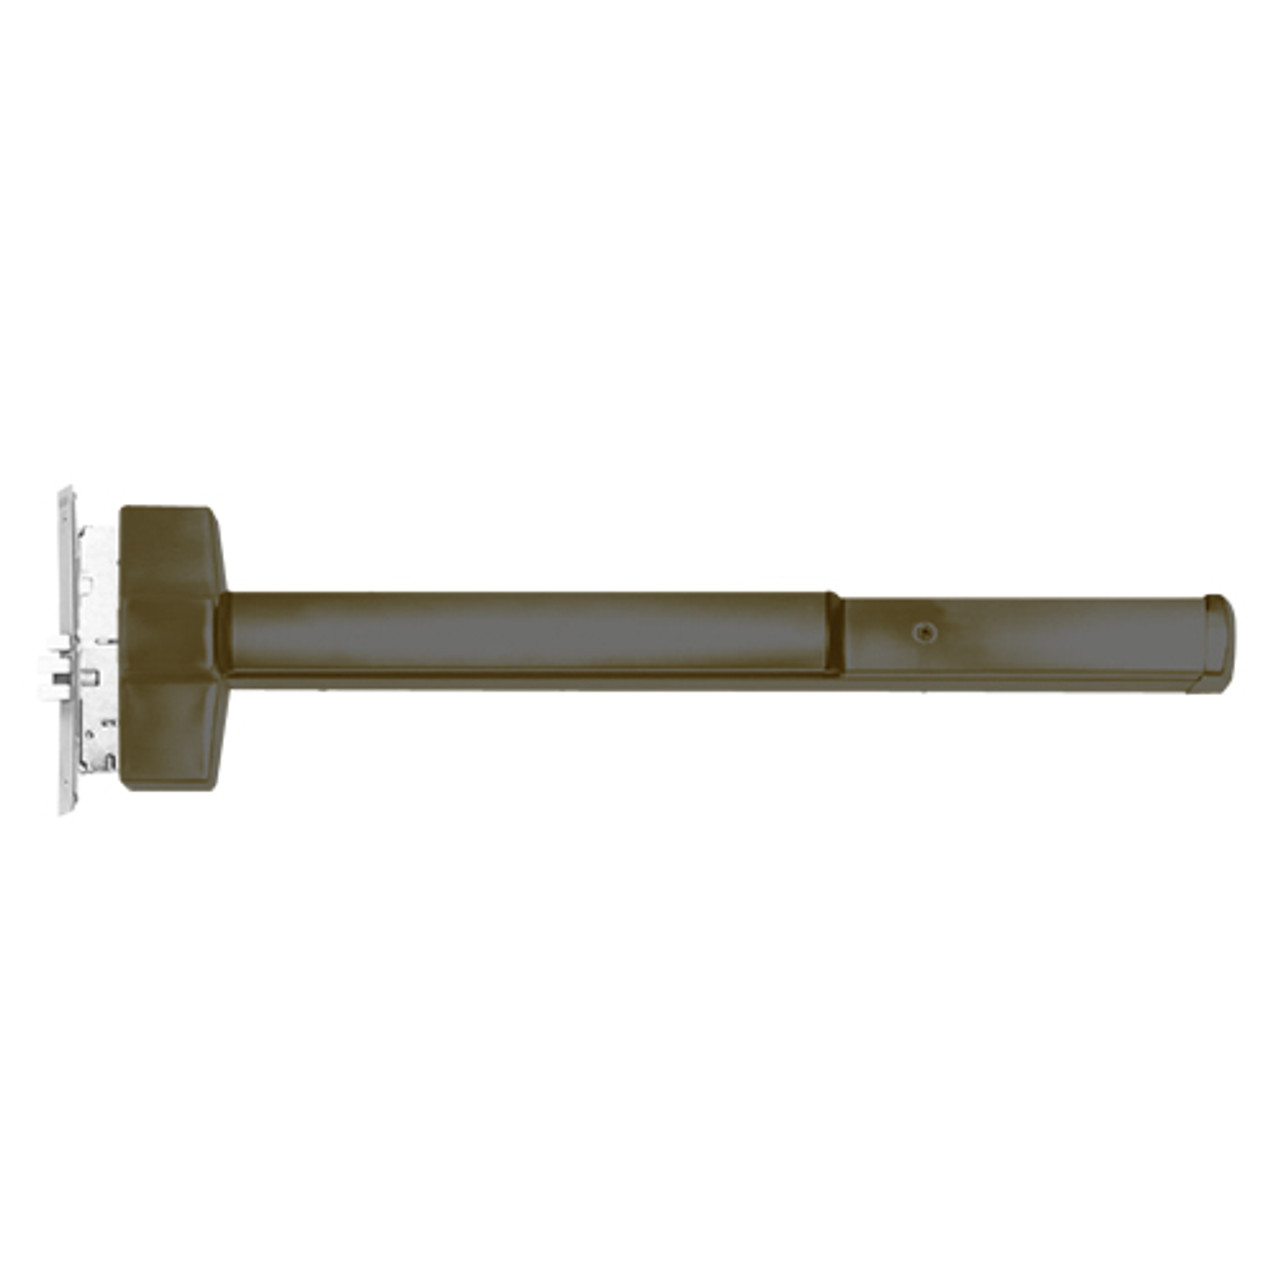 ED5600L-613-LHR Corbin ED5600 Series Non Fire Rated Mortise Exit Device in Oil Rubbed Bronze Finish